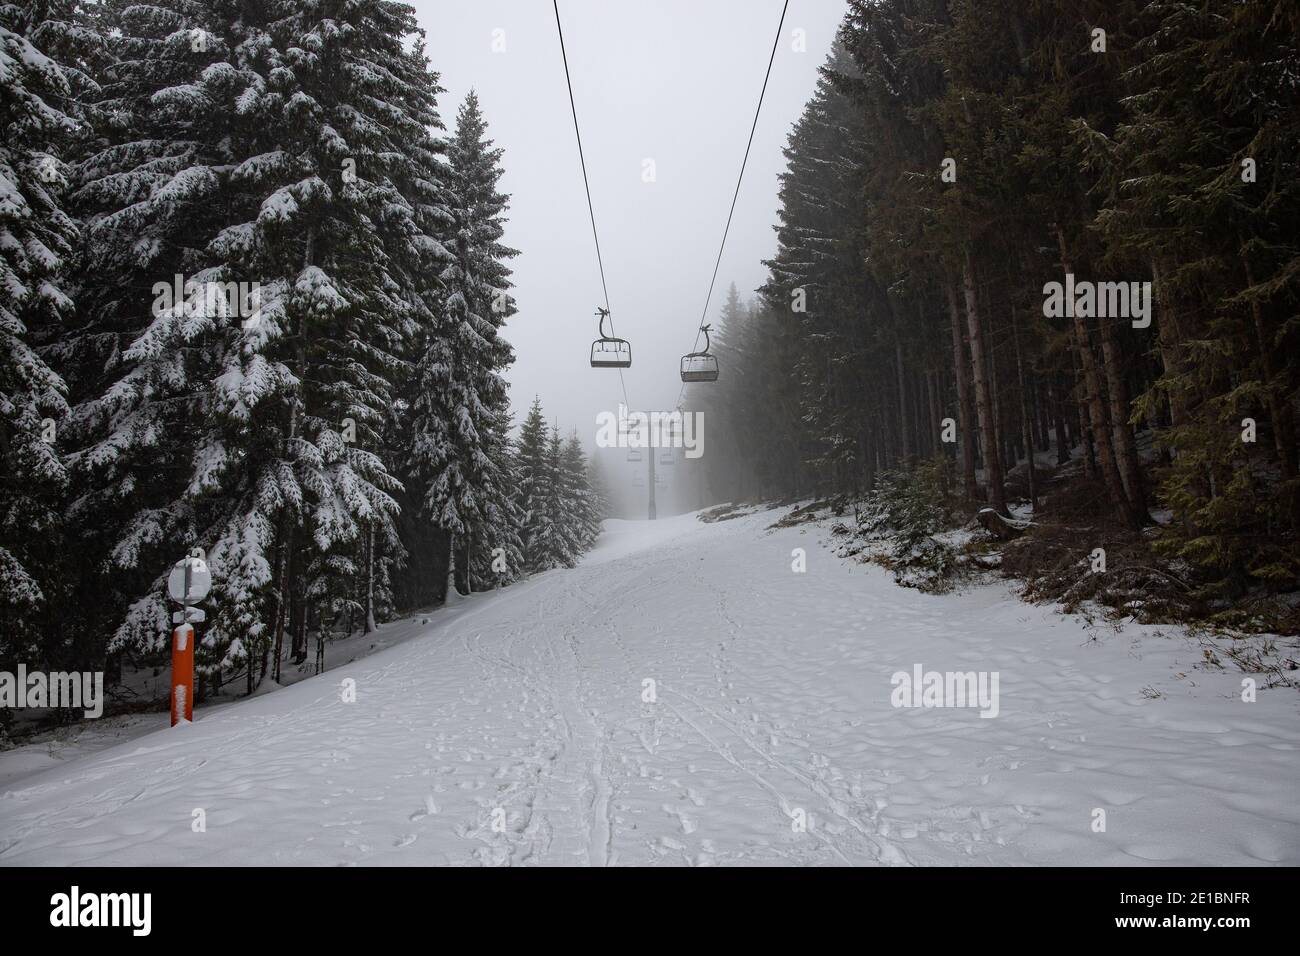 Empty Ski Lift on a snowy winter landscape, with snow covered mountains and big pine and fir trees, in the fog. The chairlift has no people on Stock Photo